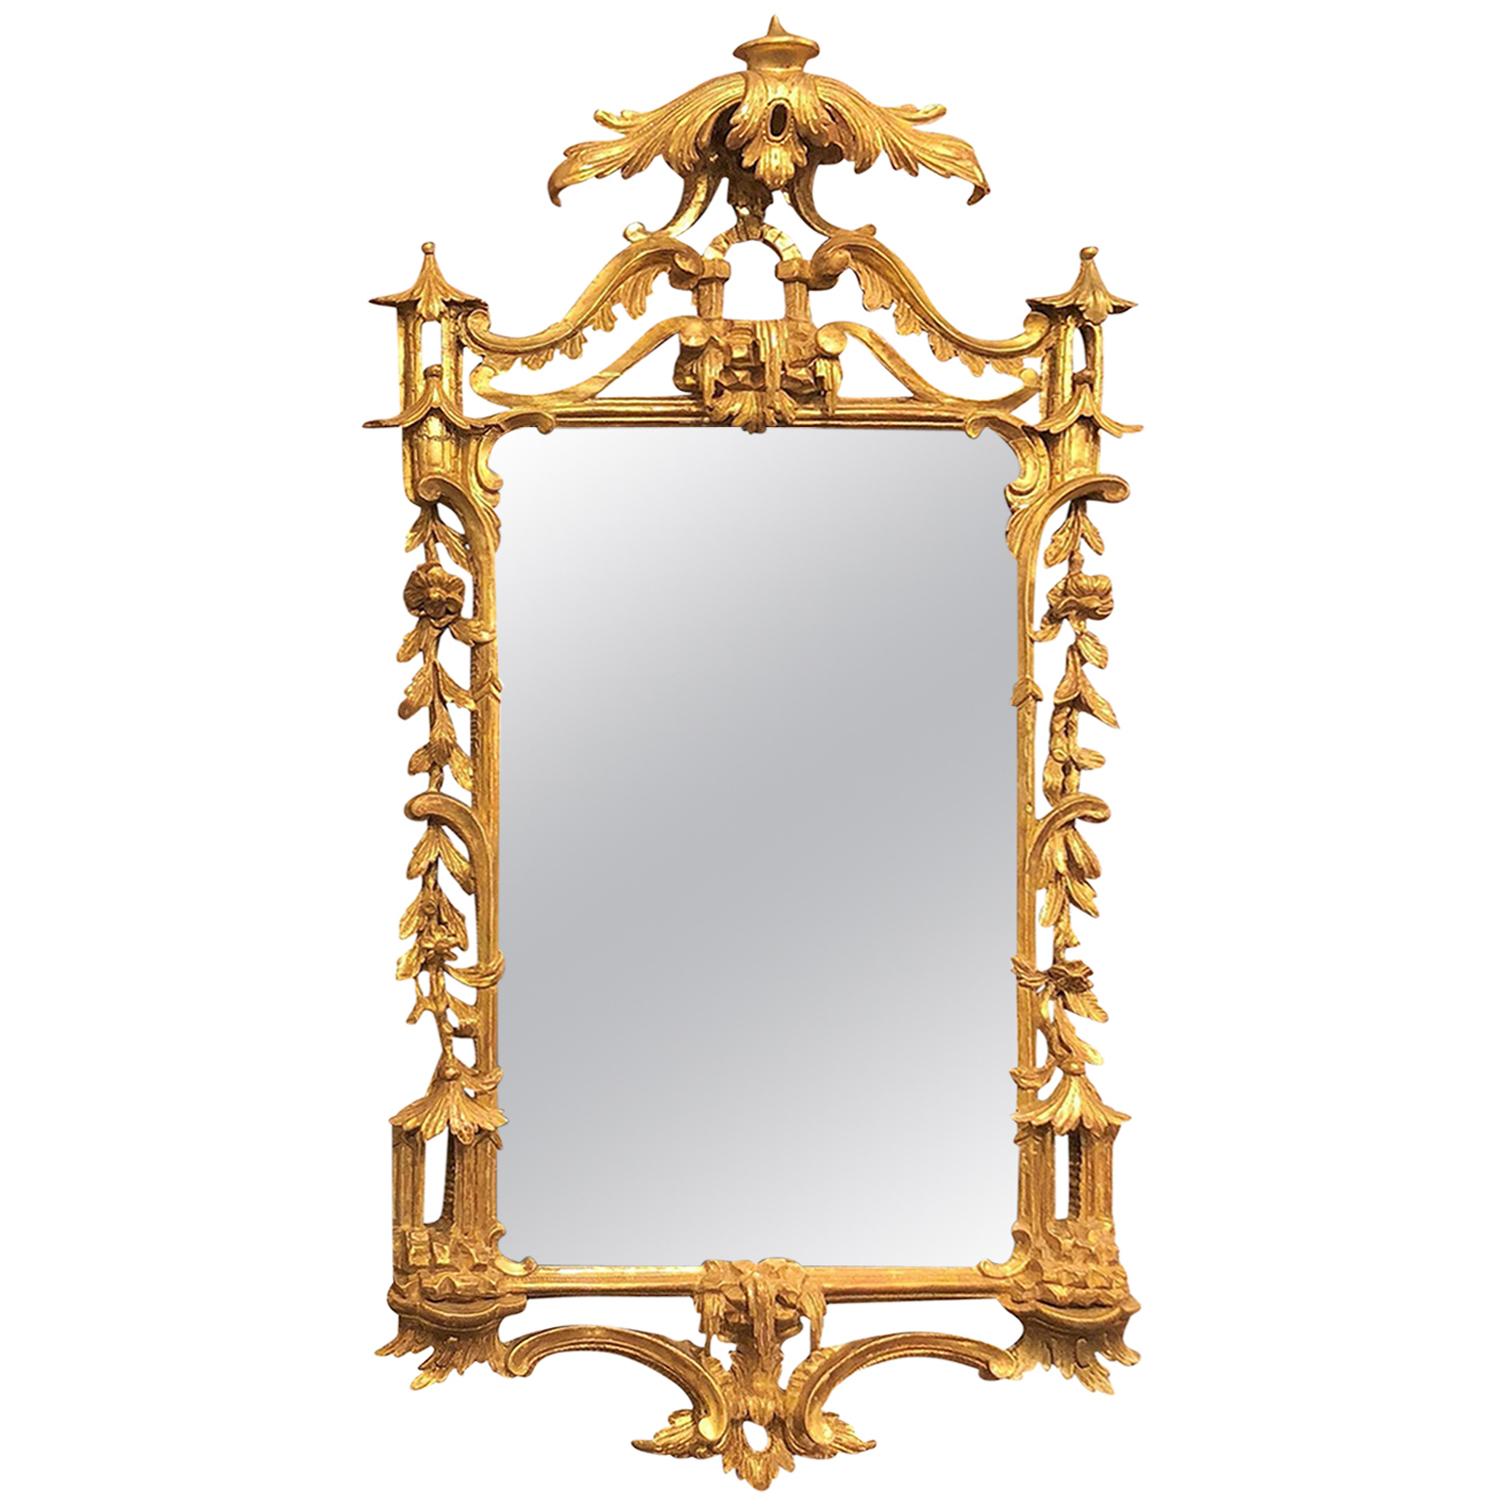 Antique Chinoiserie Style Gilded Carved Wood Mirror, circa 1920-1930